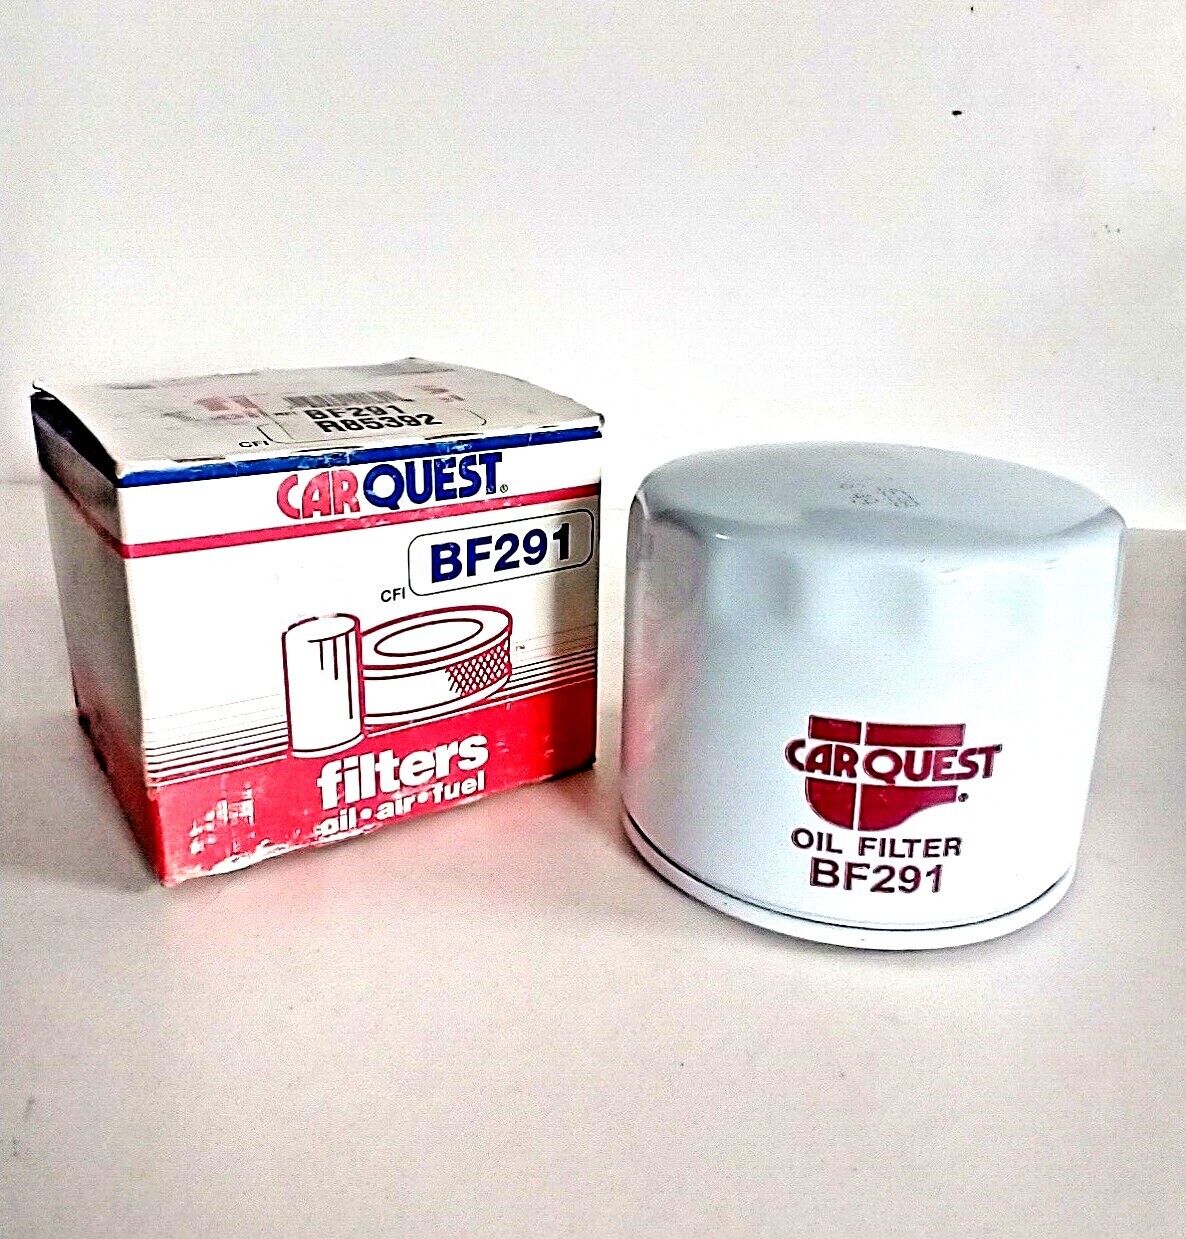 Engine Oil Filter CARQUEST BF291/R85392 (Made in USA)